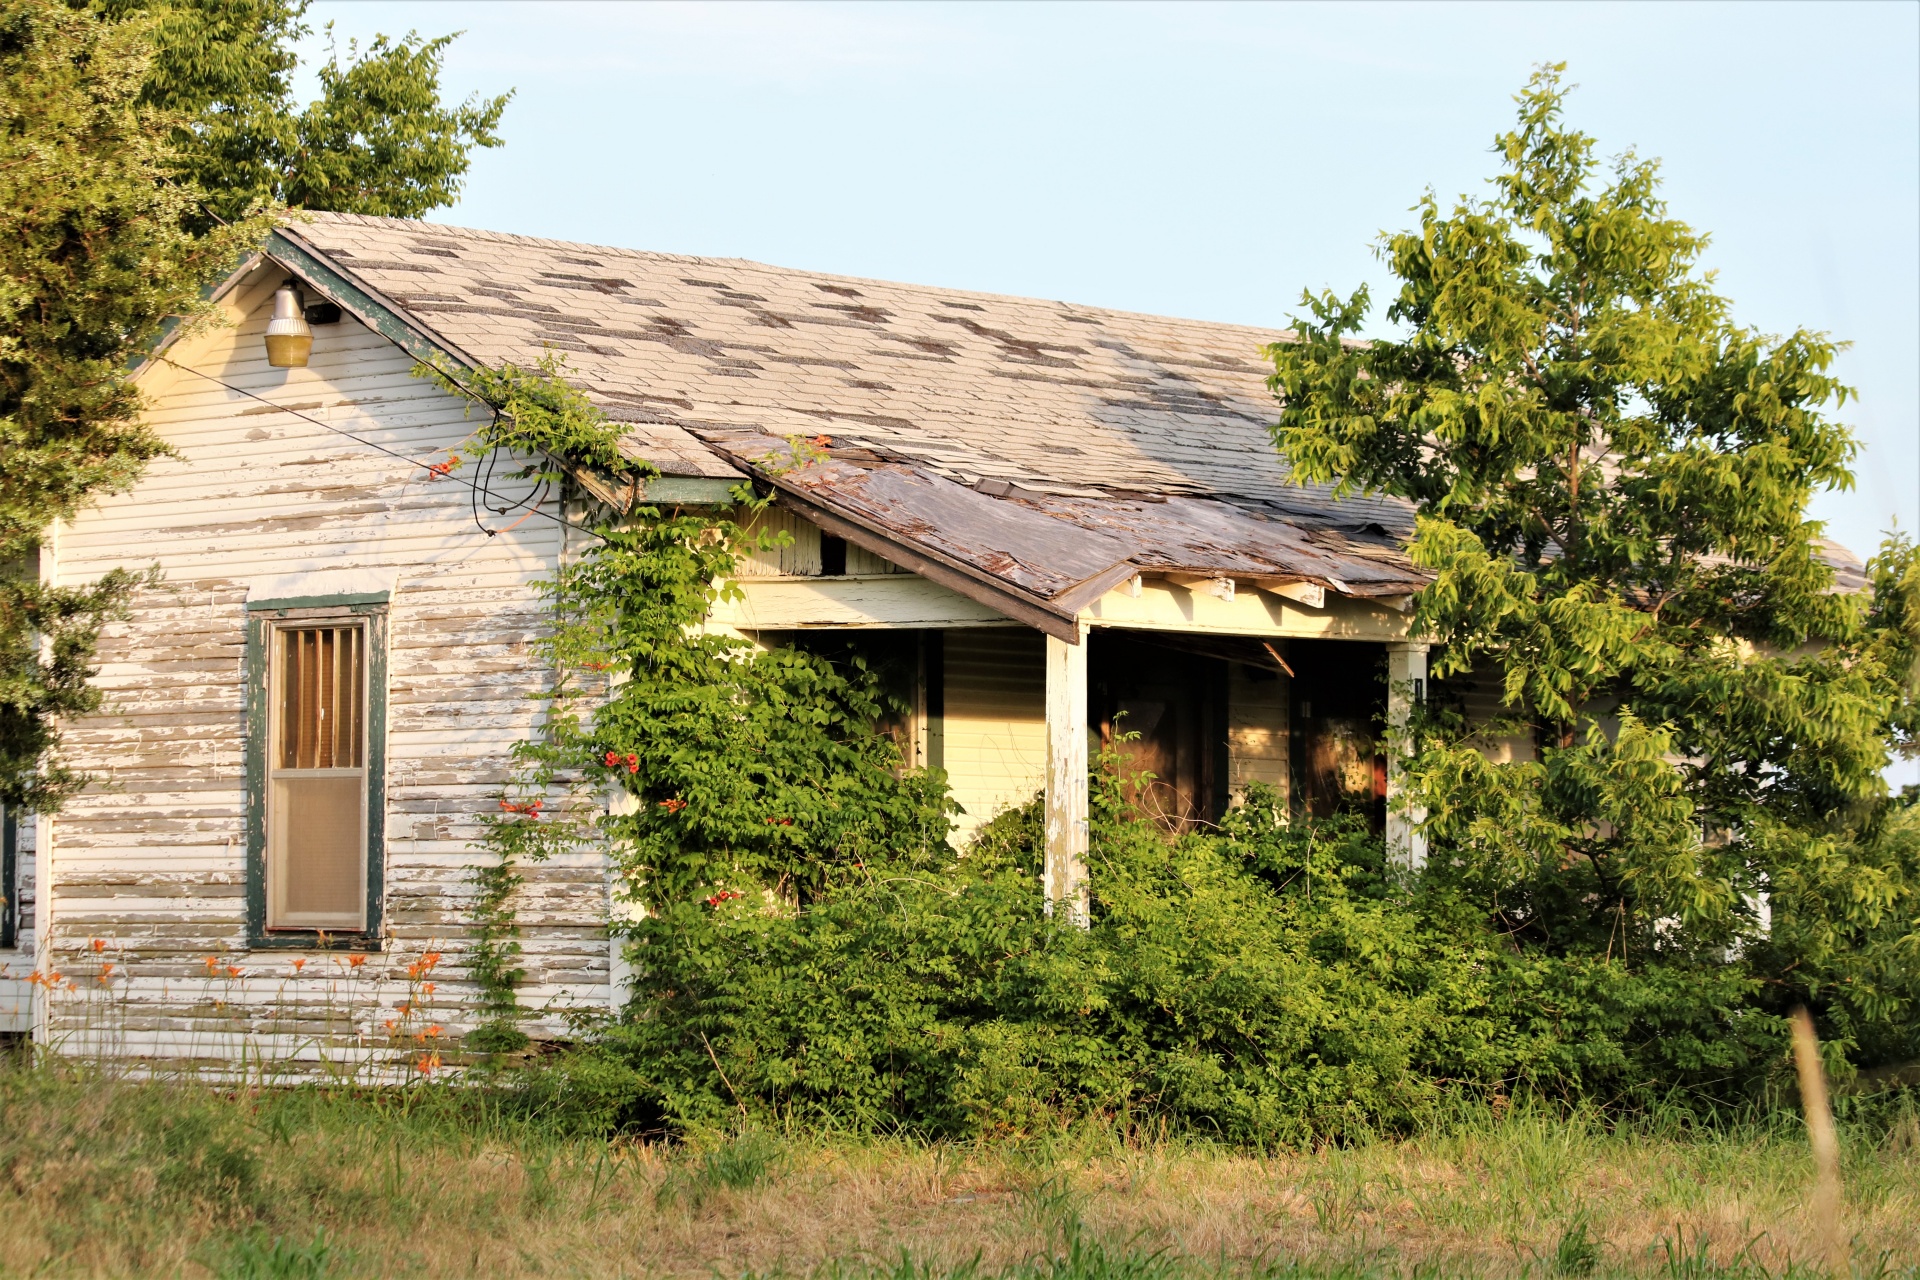 An old wooden frame house, with white peeling paint, is overgrown with trees and vines as it sits abandoned in the Oklahoma countryside.